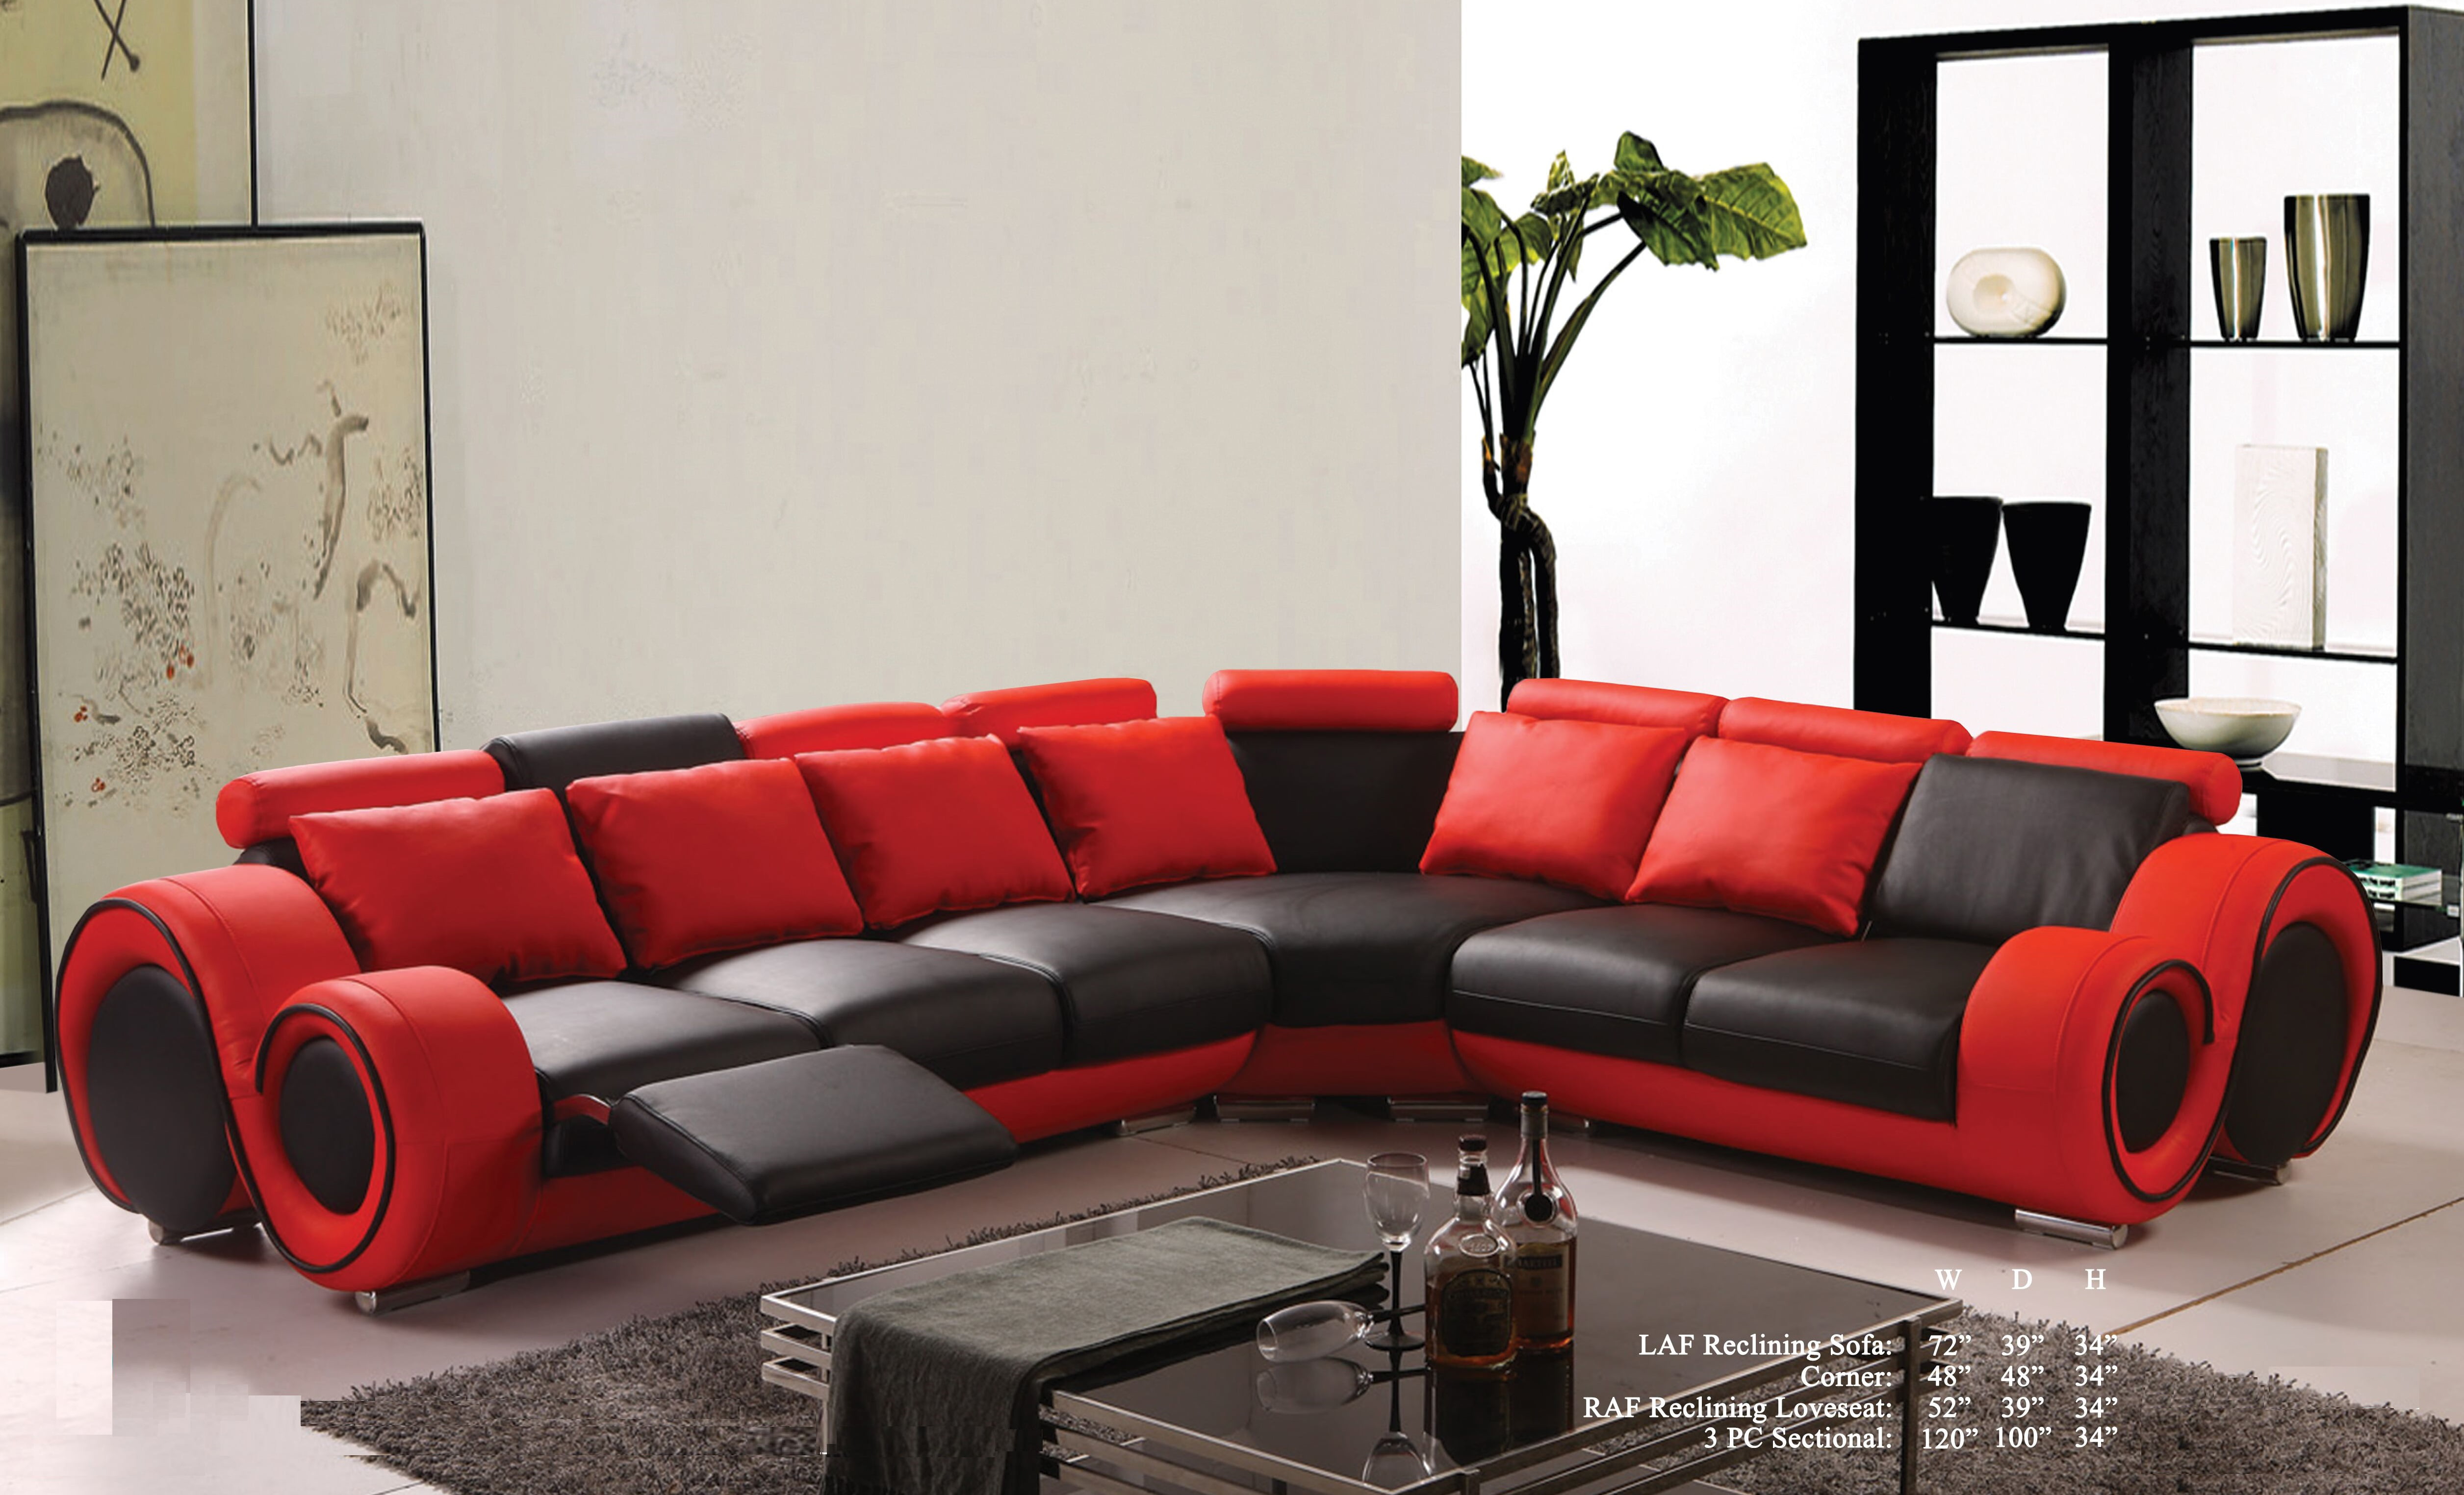 Black Bonded Leather Sectional Sofa Set, Red And Black Leather Living Room Set